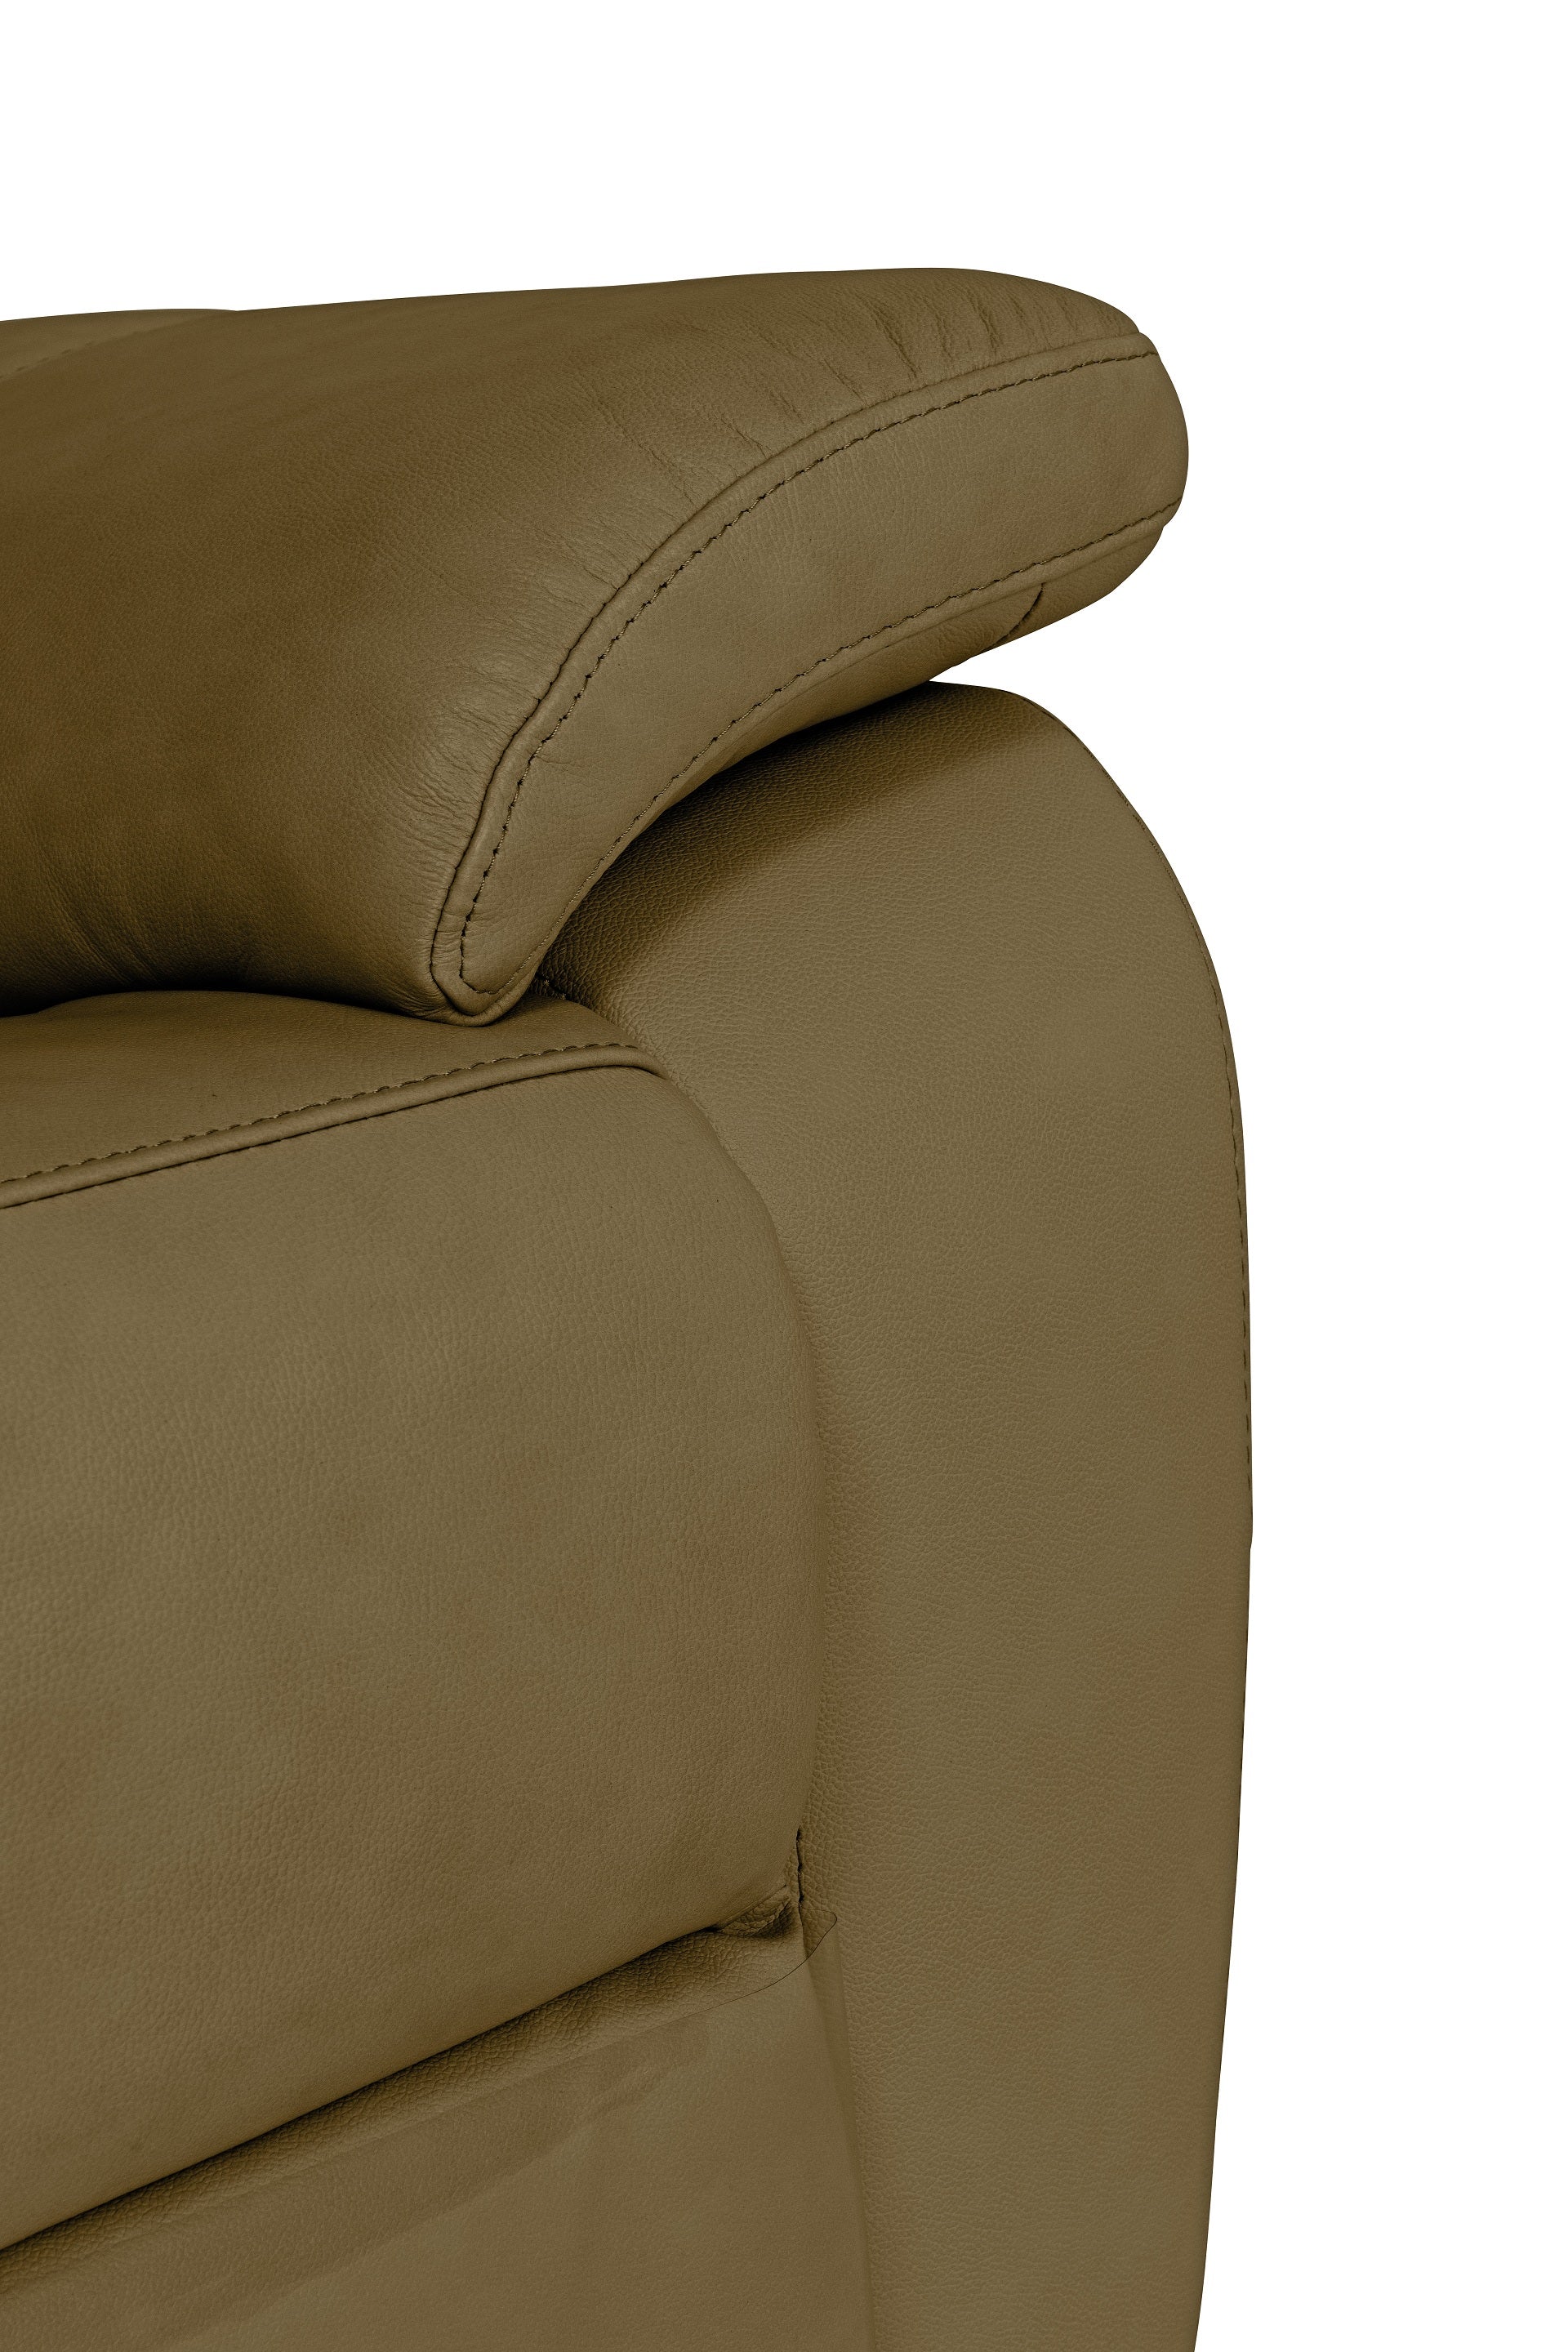 Sonia Leather Electric Recliner - Brown